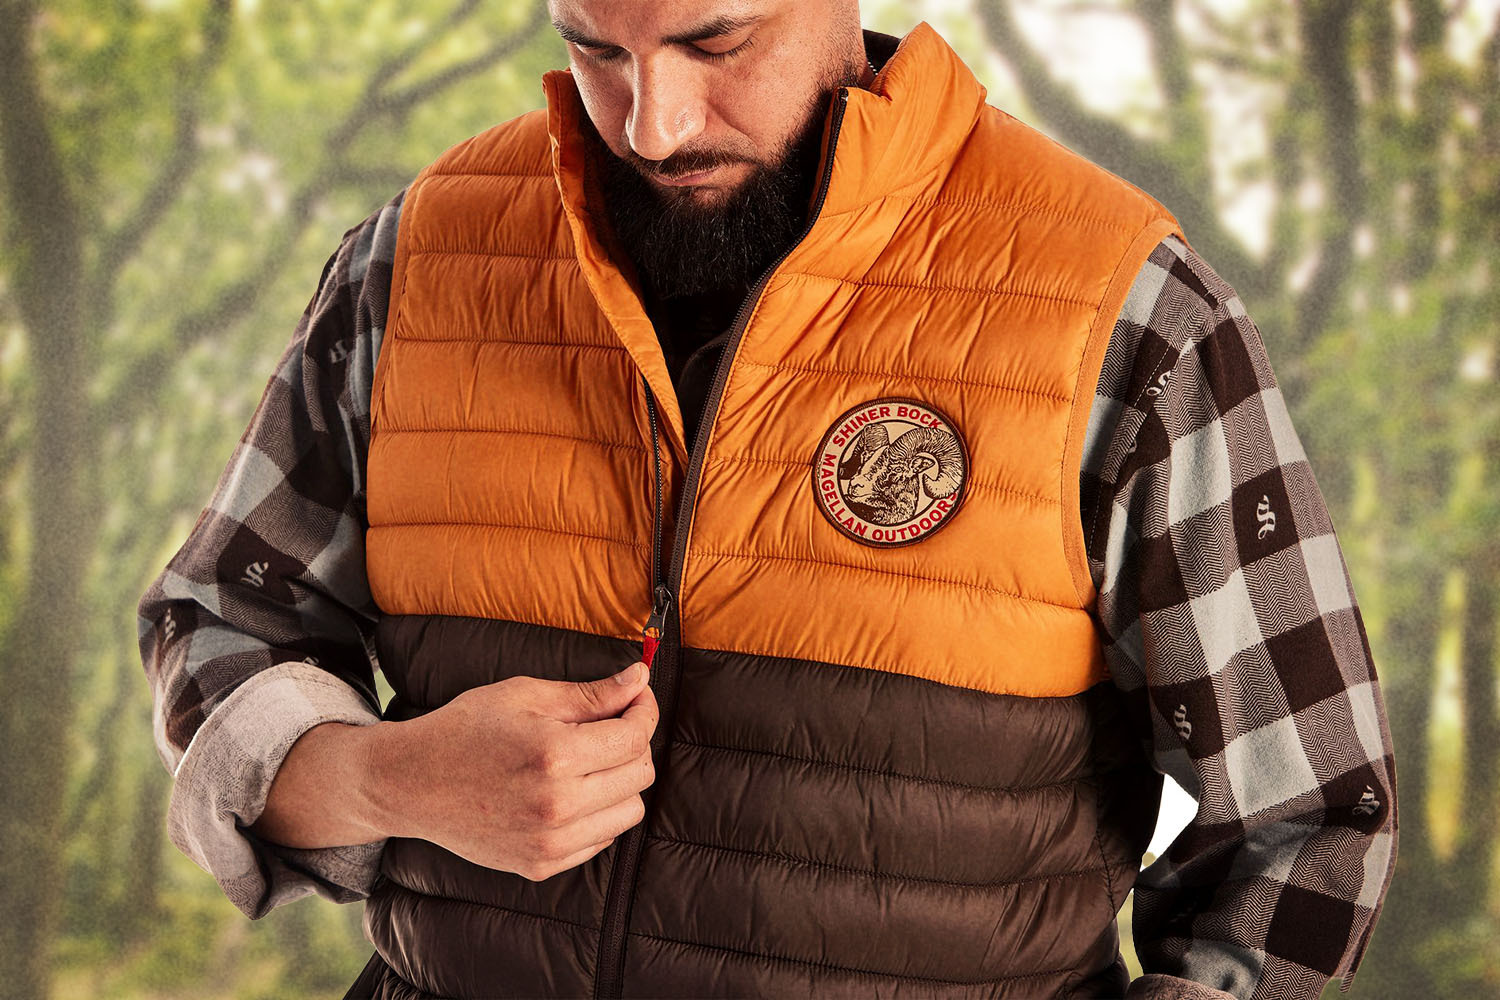 The Hottest Collab of Summer? Shiner Beer's New Outdoor Gear